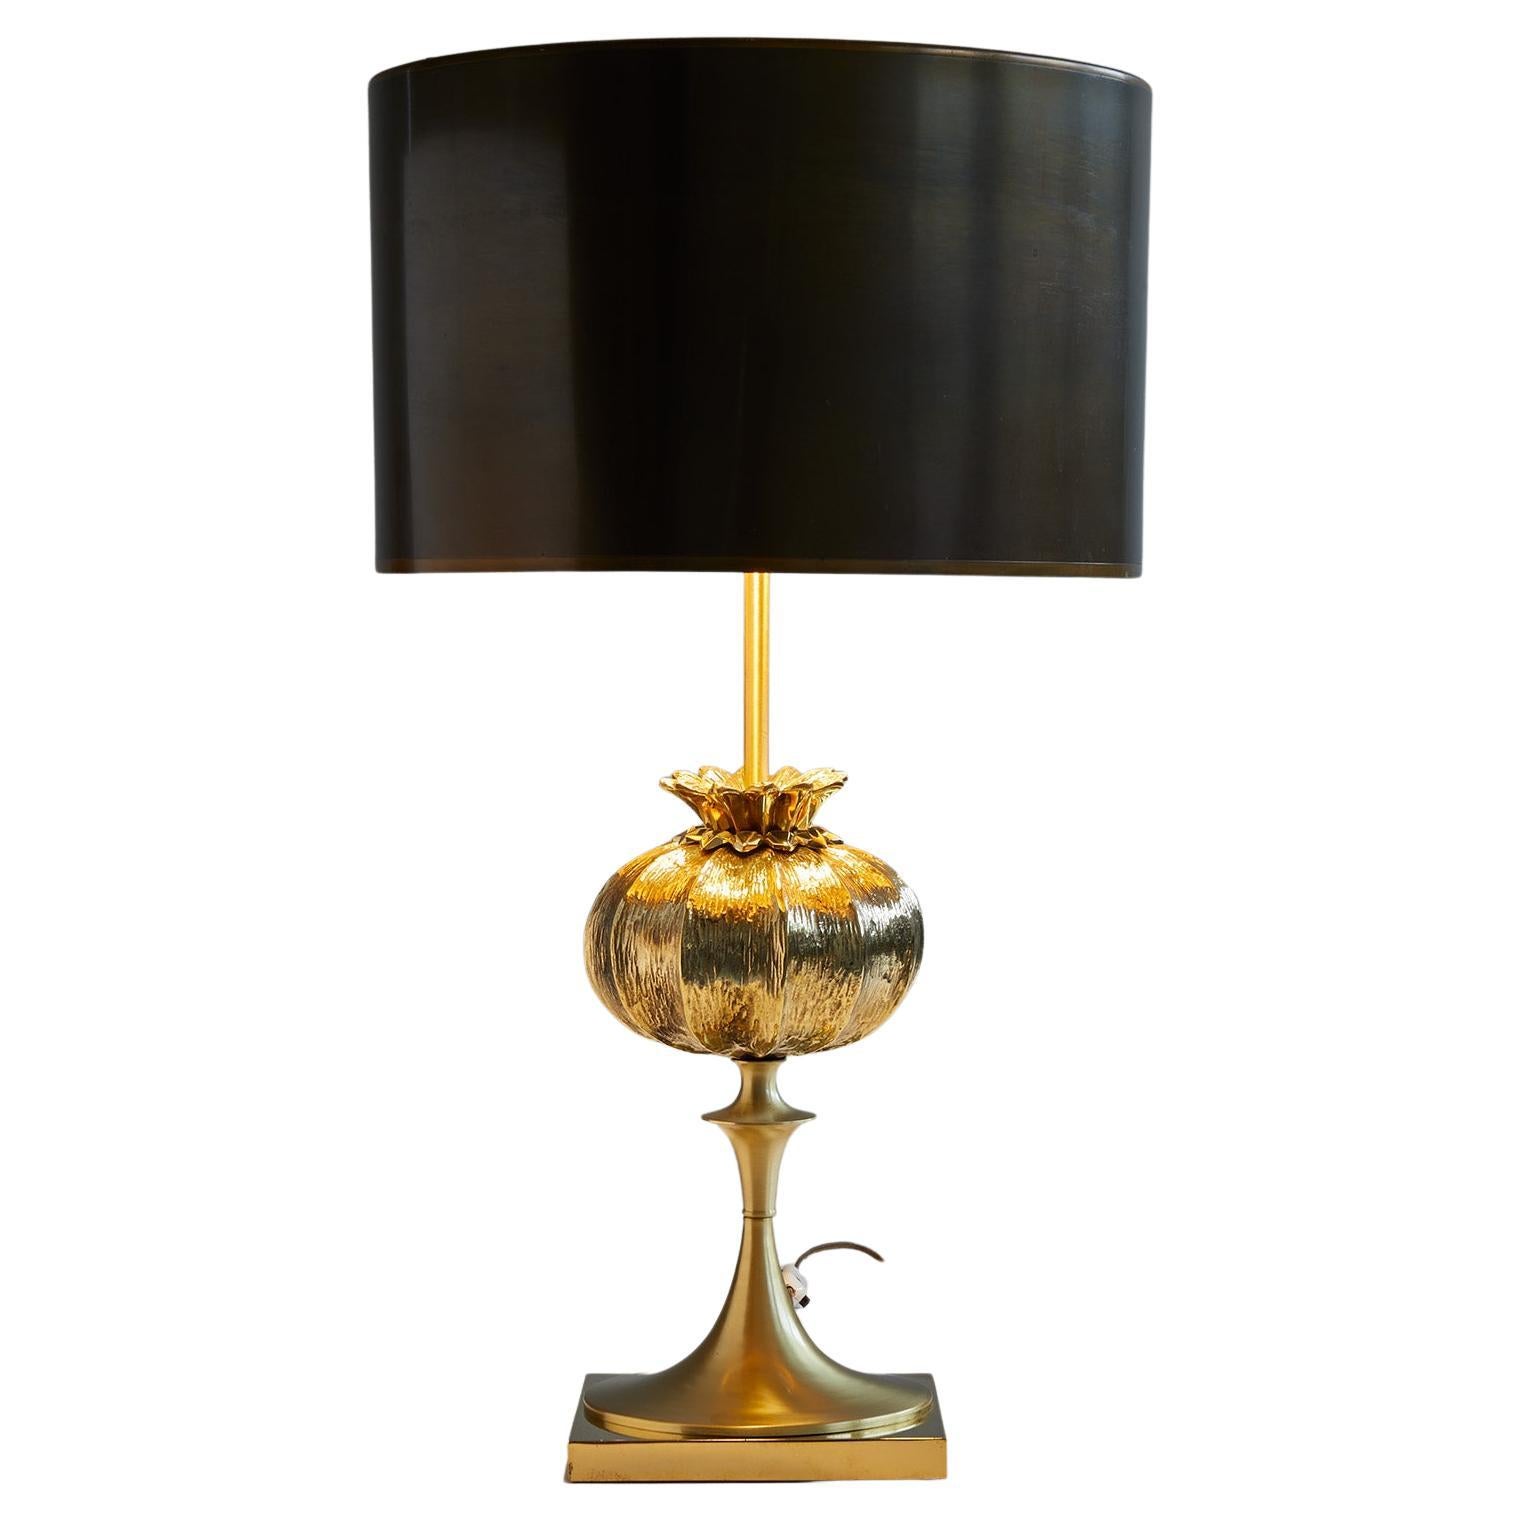 Bronze and Brass "Pavot" Table Lamp by Maison Charles, France 1965